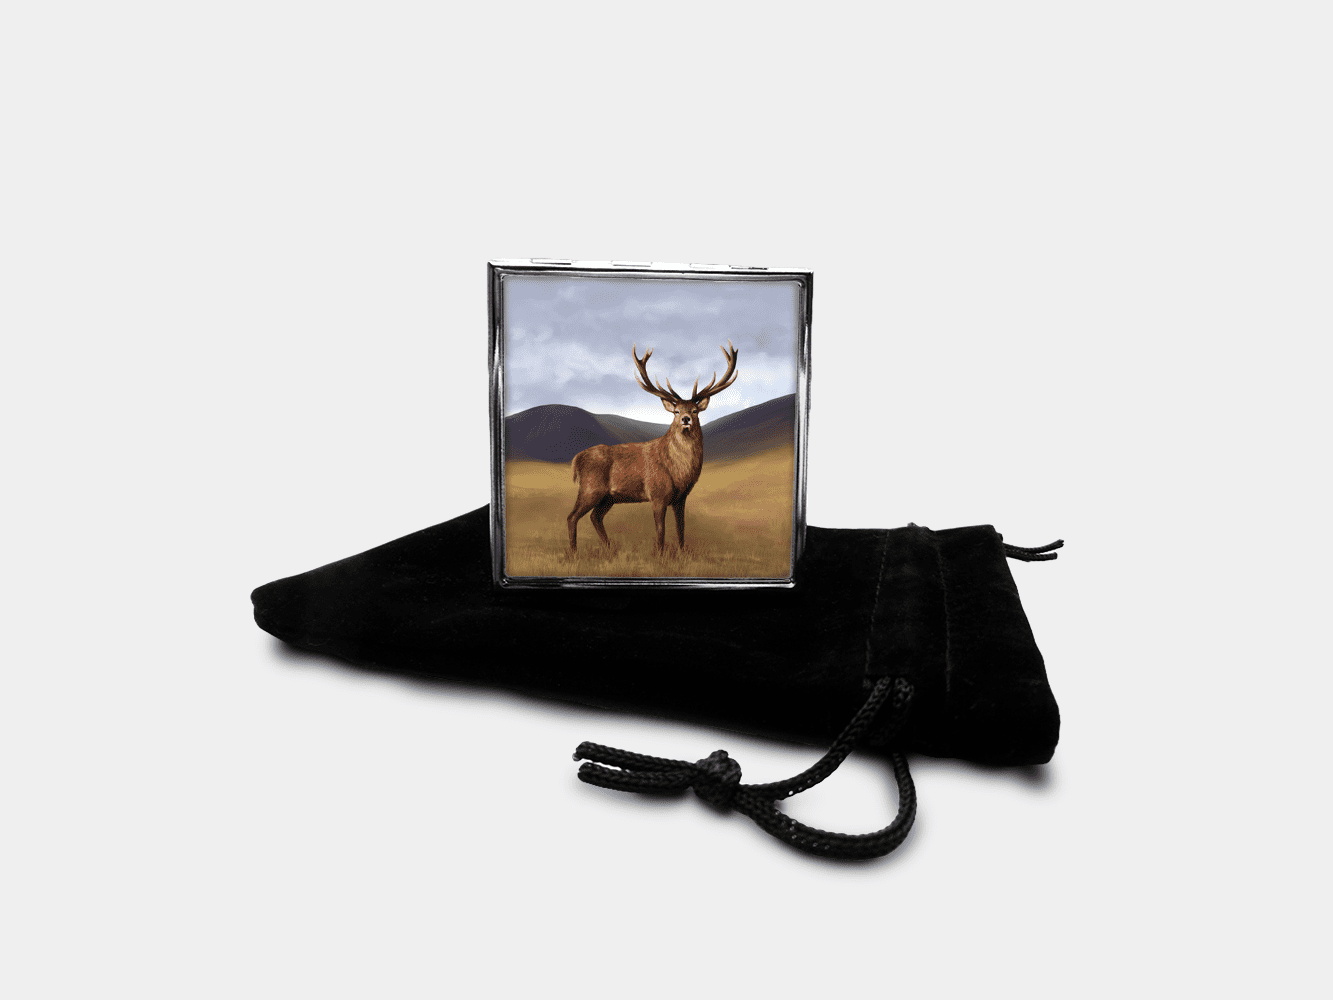 Country Images Personalised Custom Metal Pill Boxes Box Scotland Highlands Highland Stag Stags Deer Roebuck Roebucks Gift Gifts